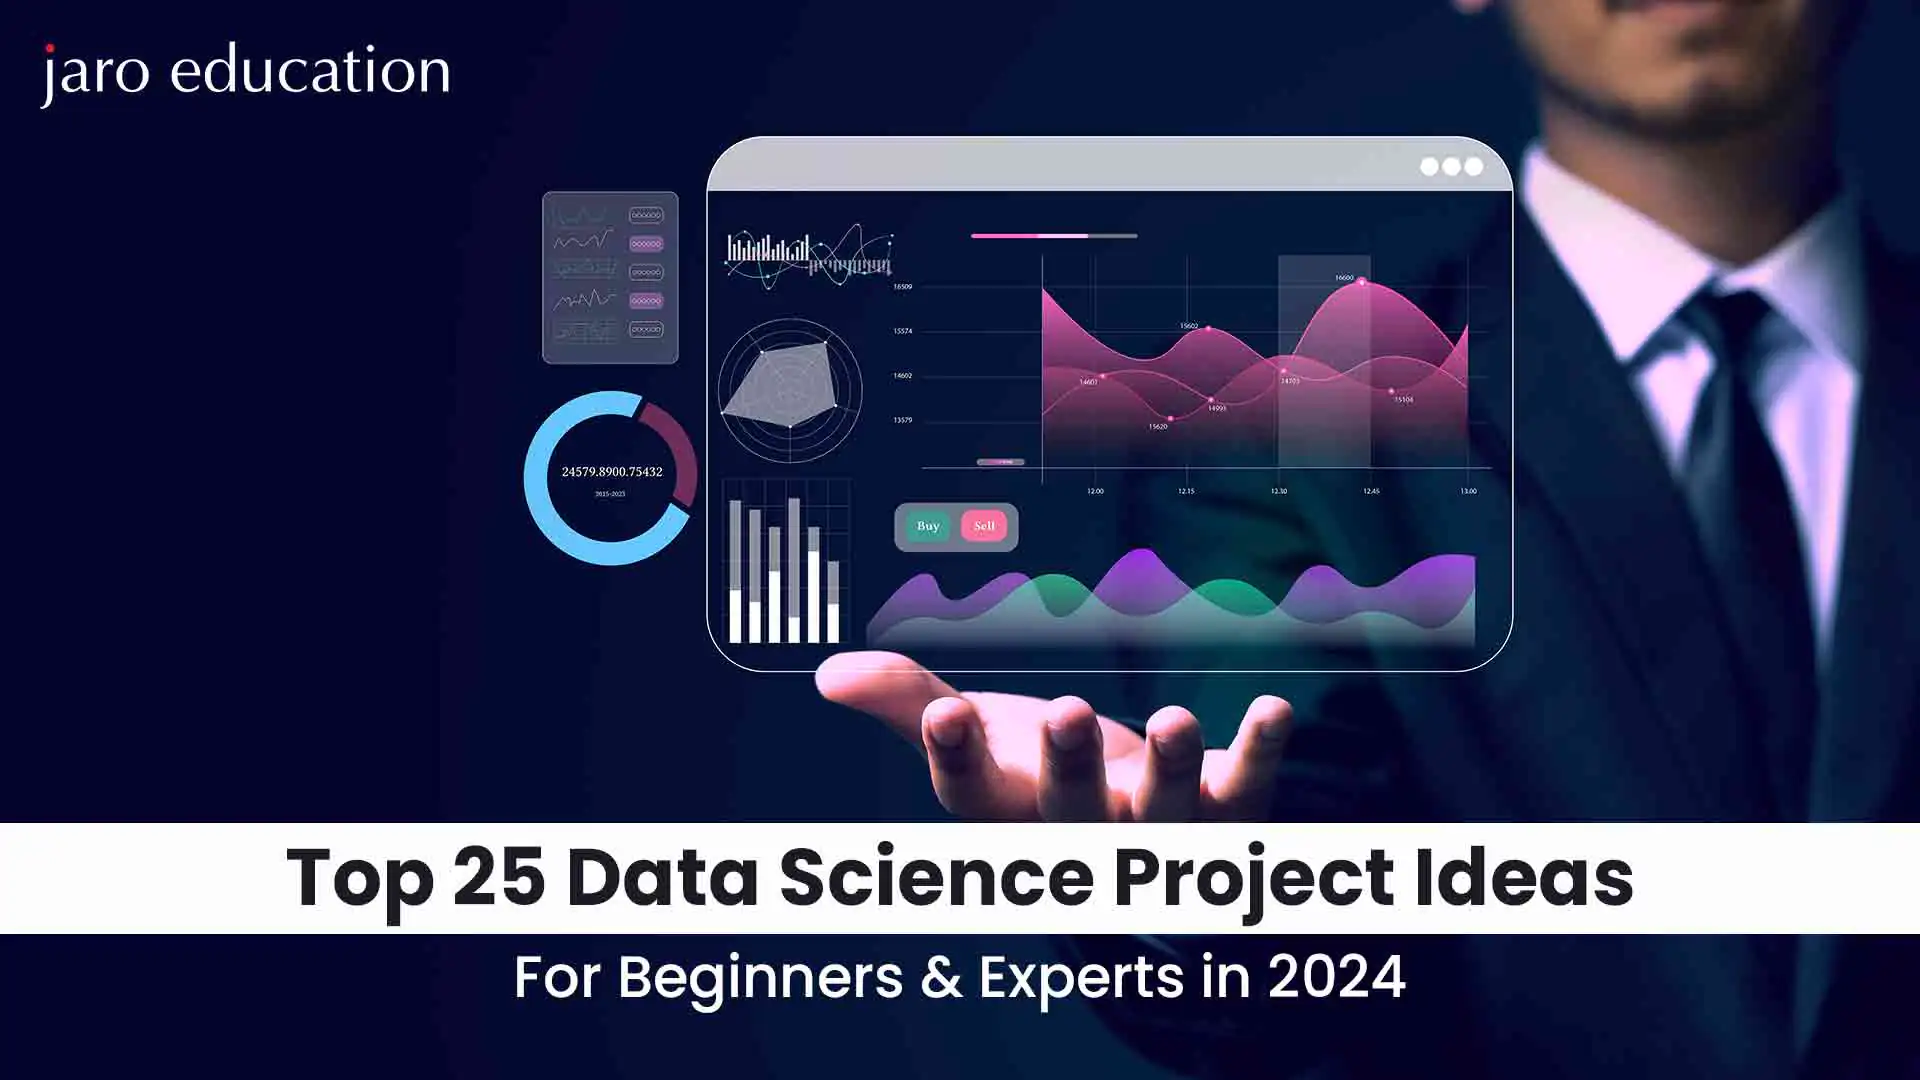 Top 25 Data Science Project Ideas For Beginners & Experts in 2024